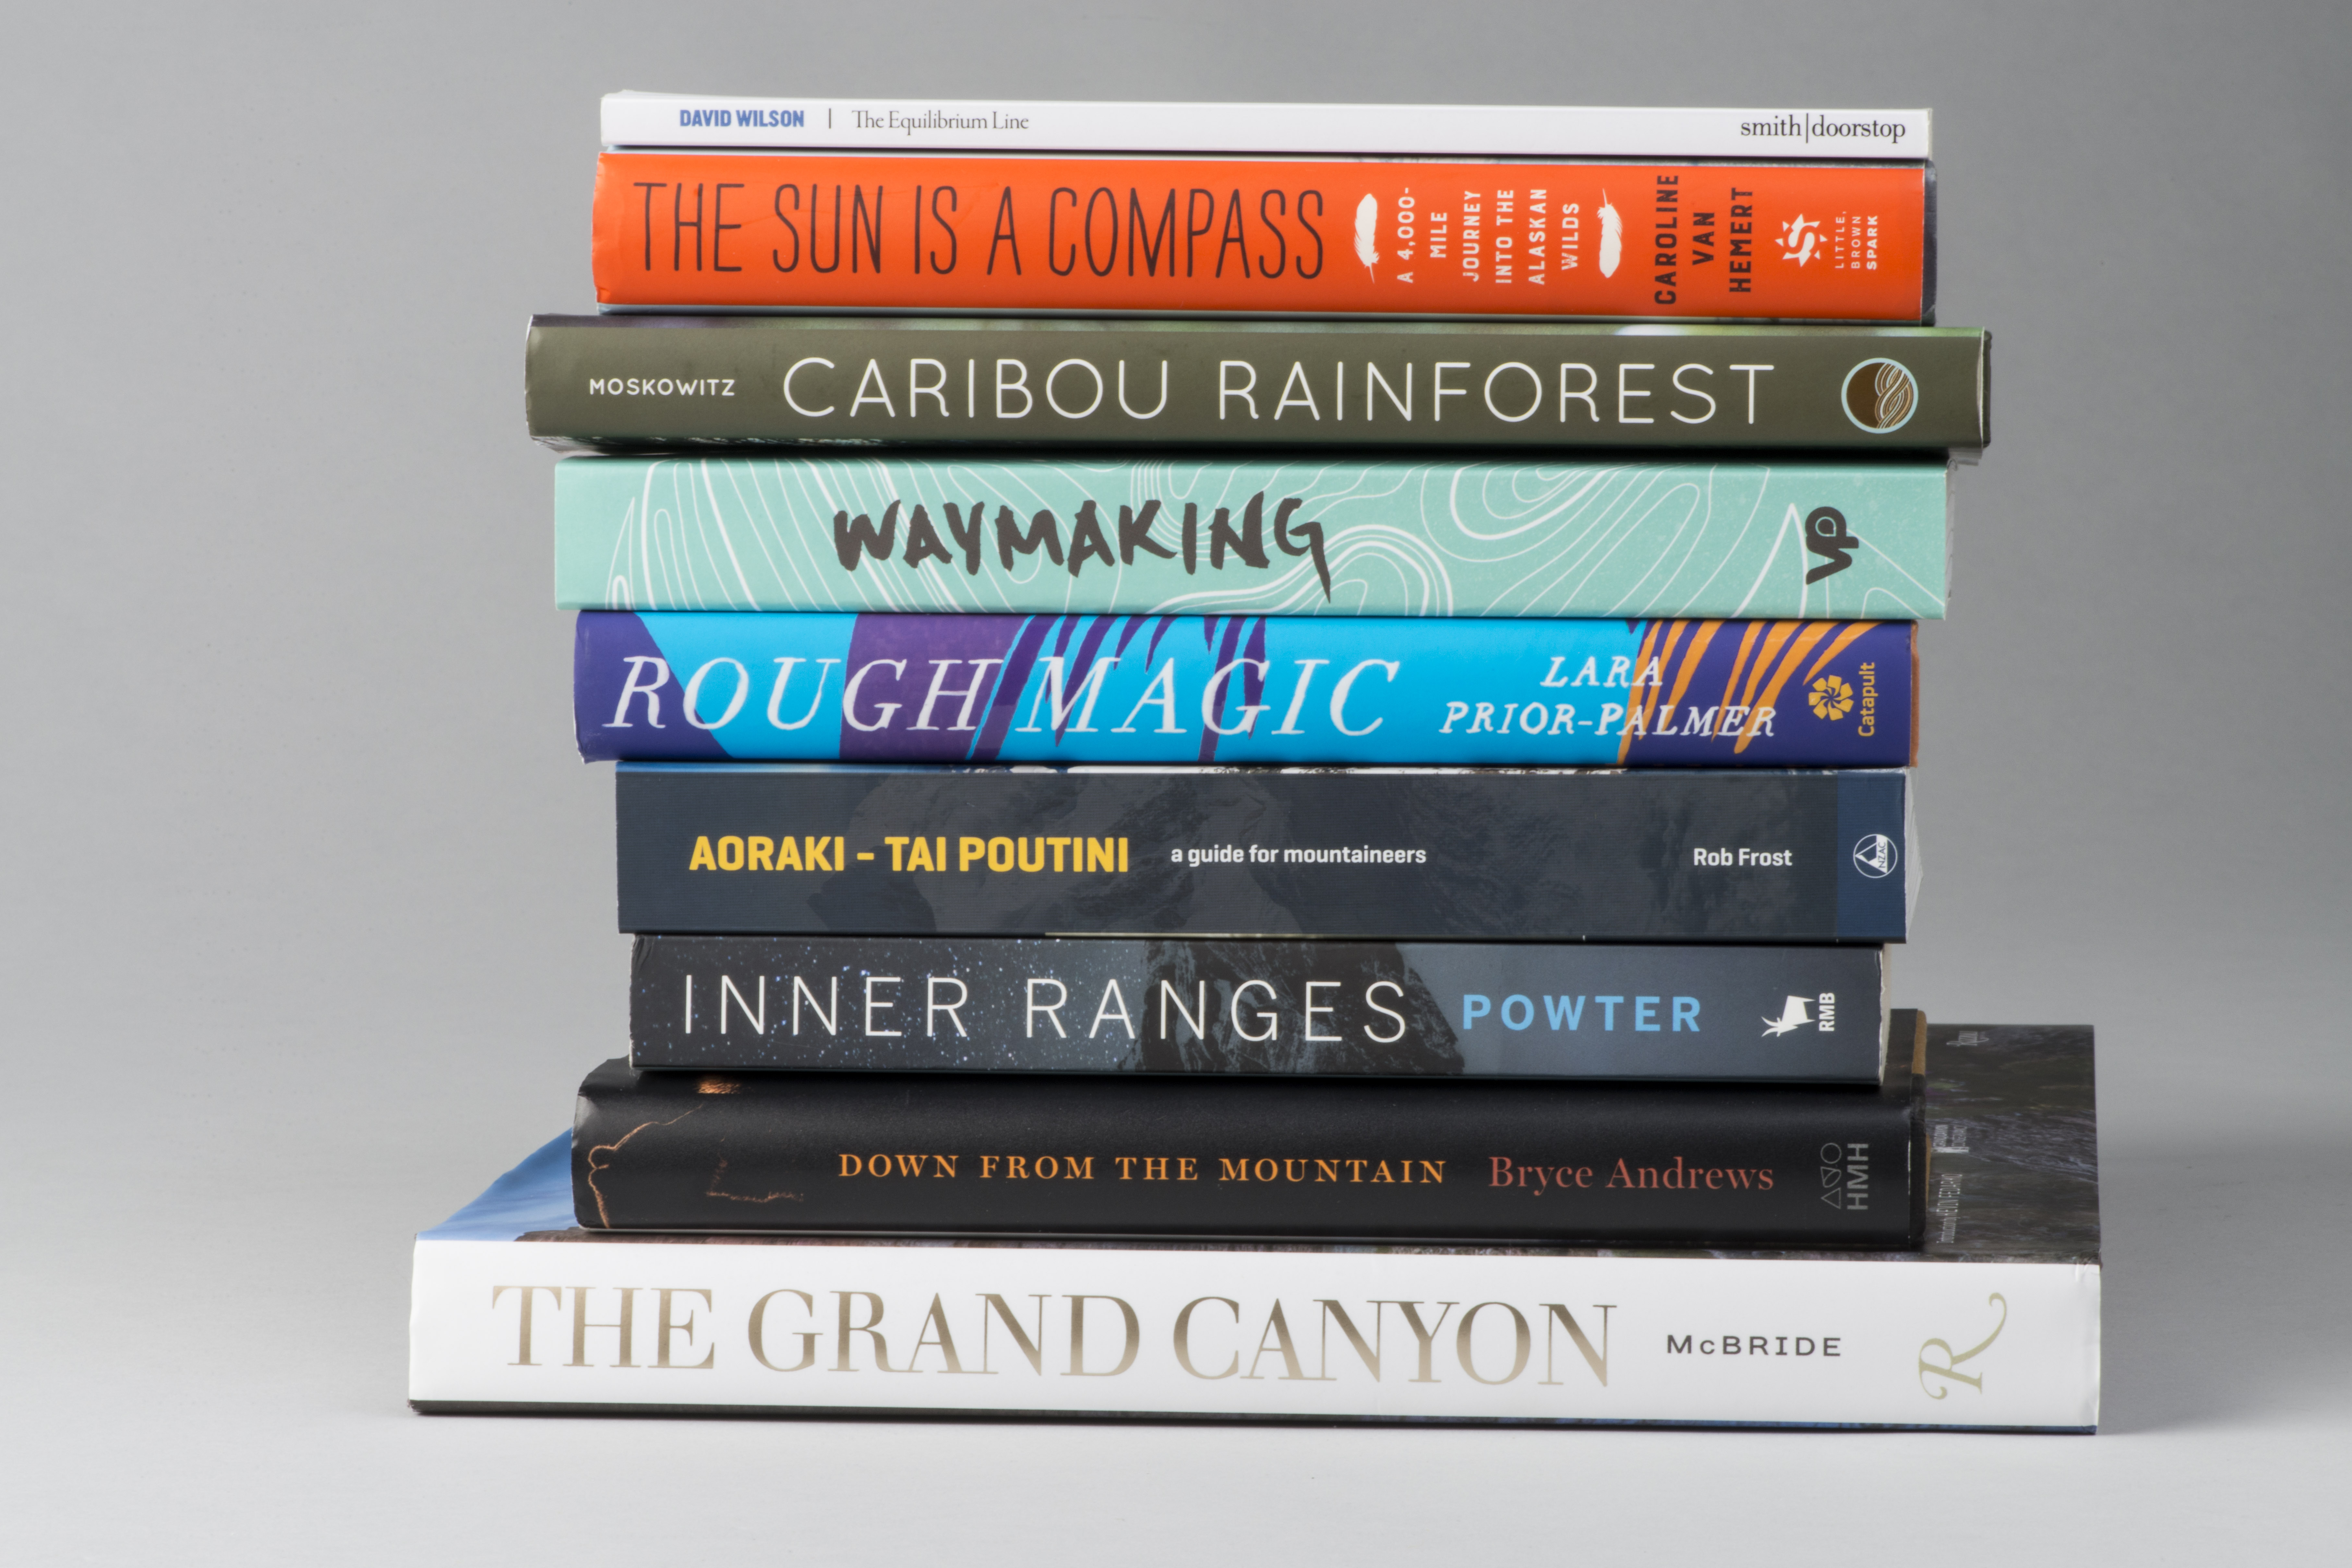 2019 Banff Mountain Book Competition category award winners